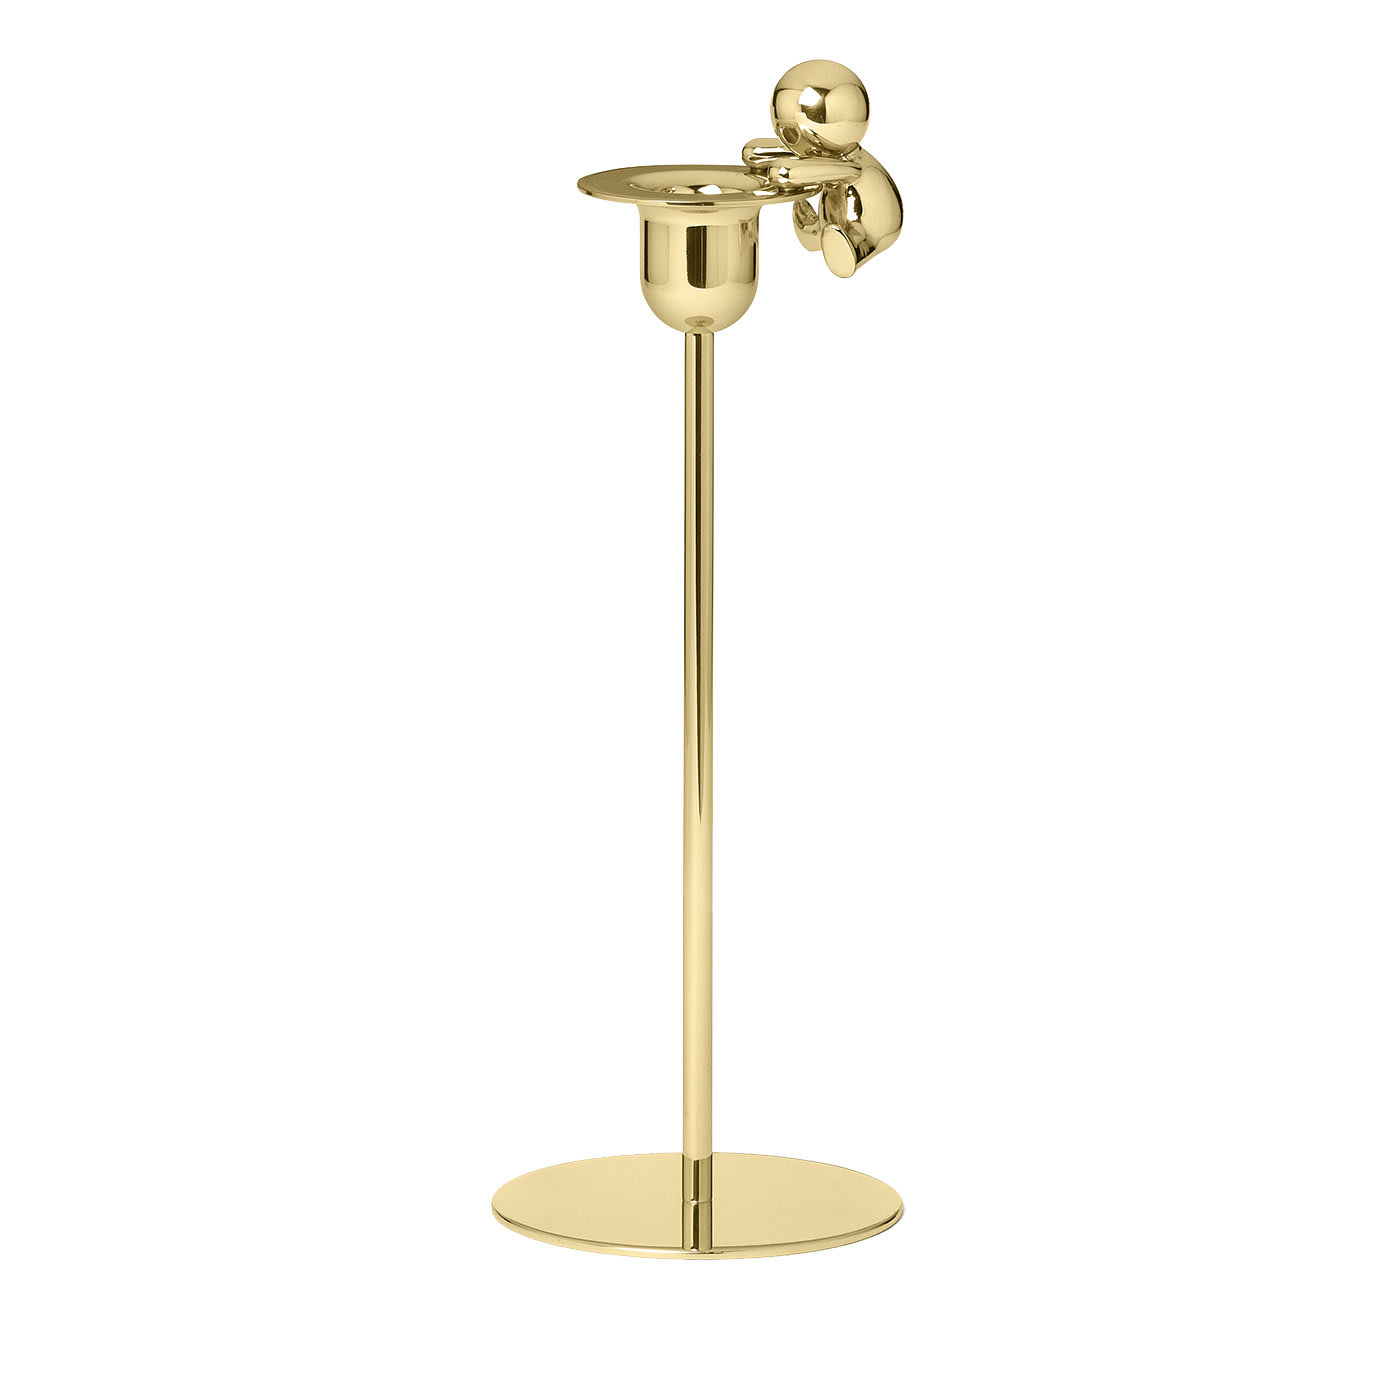 Omini Climber Tall Candlestick in Polished Brass By Stefano Giovannoni - Ghidini 1961